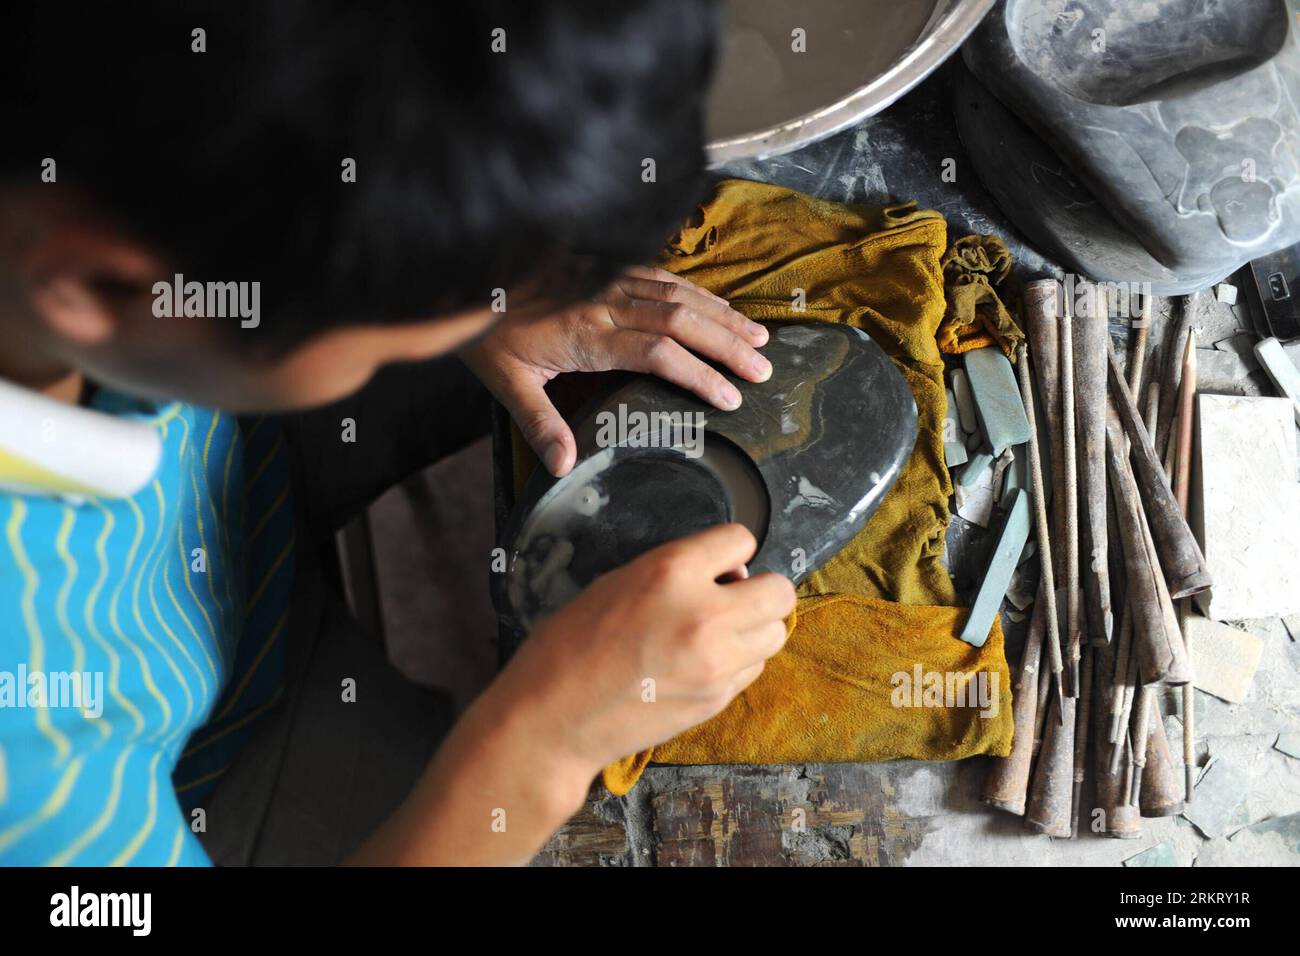 Bildnummer: 58328555  Datum: 07.08.2012  Copyright: imago/Xinhua (120809) -- SHEXIAN, Aug. 9, 2012 (Xinhua) -- An apprentice of Wen Xin polishes an inkstone in Shexian County of east China s Anhui Province, Aug. 7, 2012. Wen Xin, a 32-year-old man, is a master of inkstone carving in Shexian of Anhui Province. He started to learn the craftsmanship during his teenage years under the influence of his family. After years of study as research, Wen Xin developed a series of skills and patterns in carving the inkstone. The themes of his inkstones, various from landscapes, portrait, flowers to creatur Stock Photo